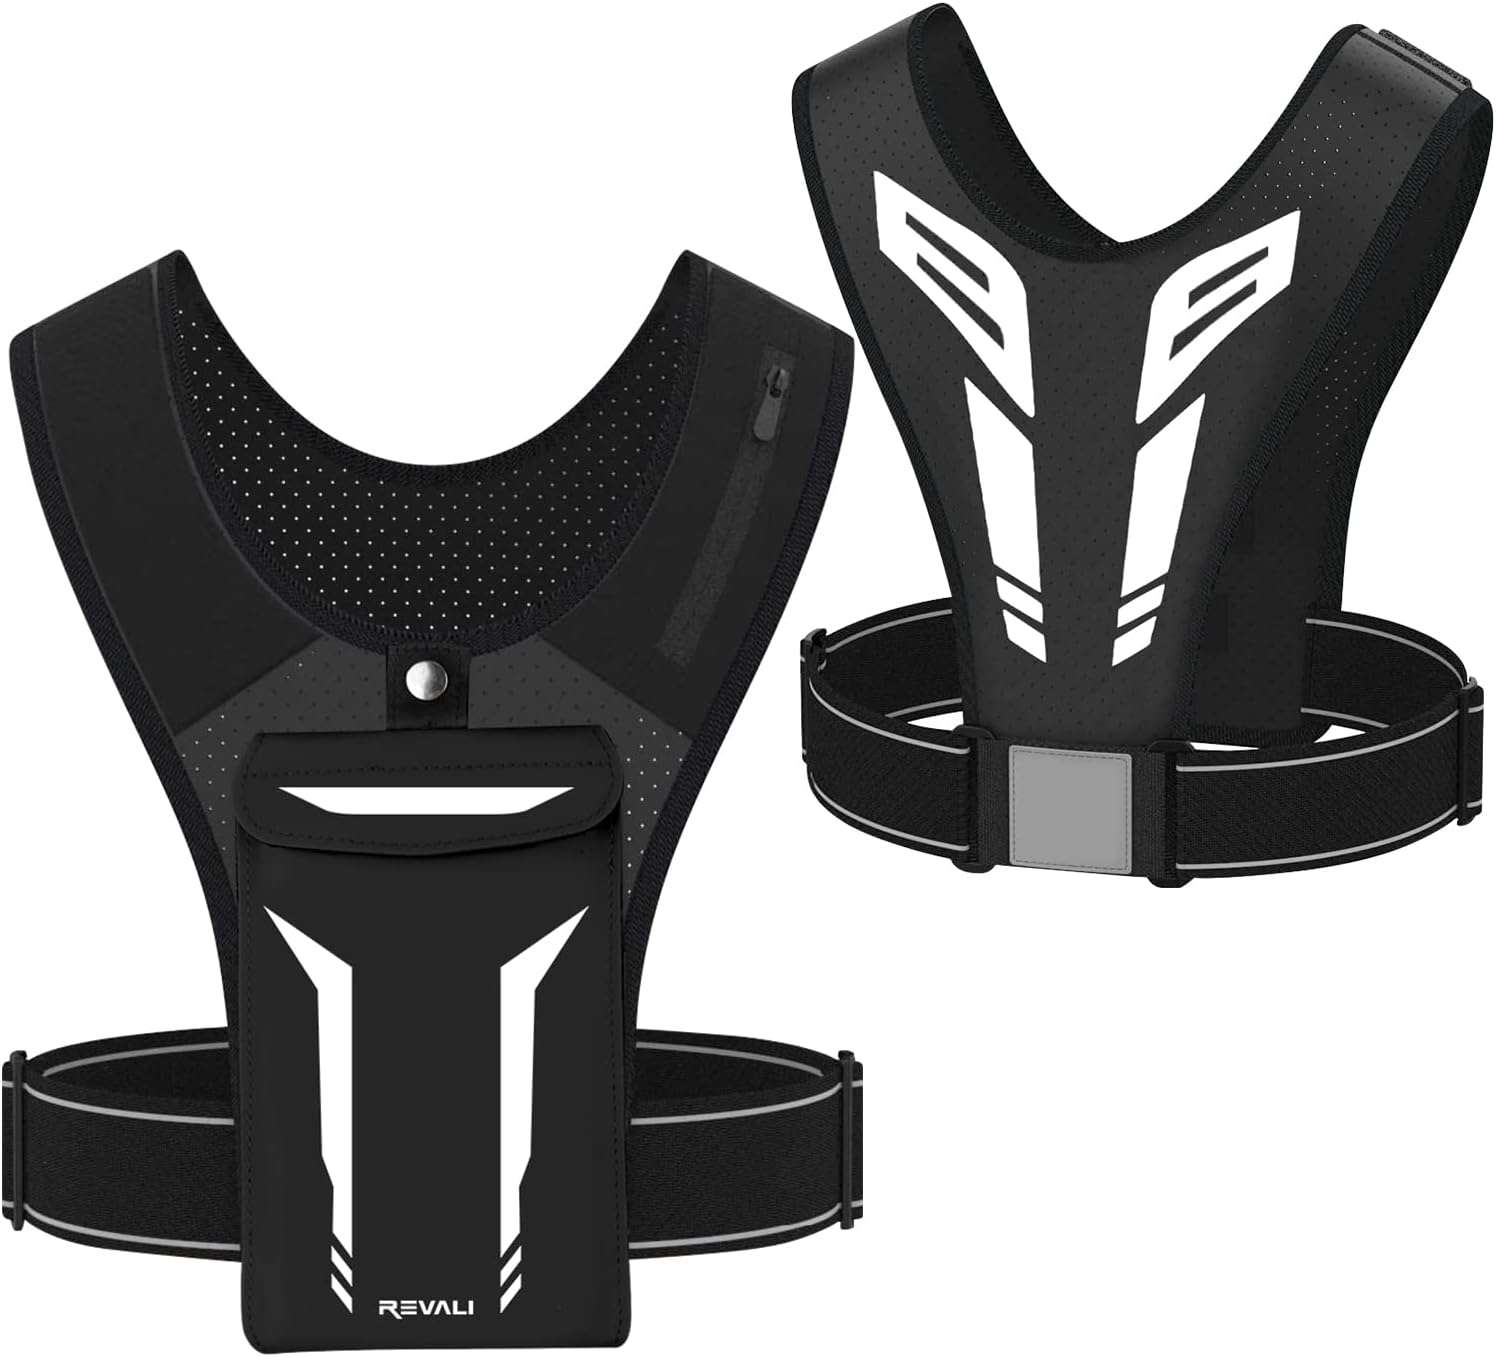 Running Vest Review - Explore Your Fitness